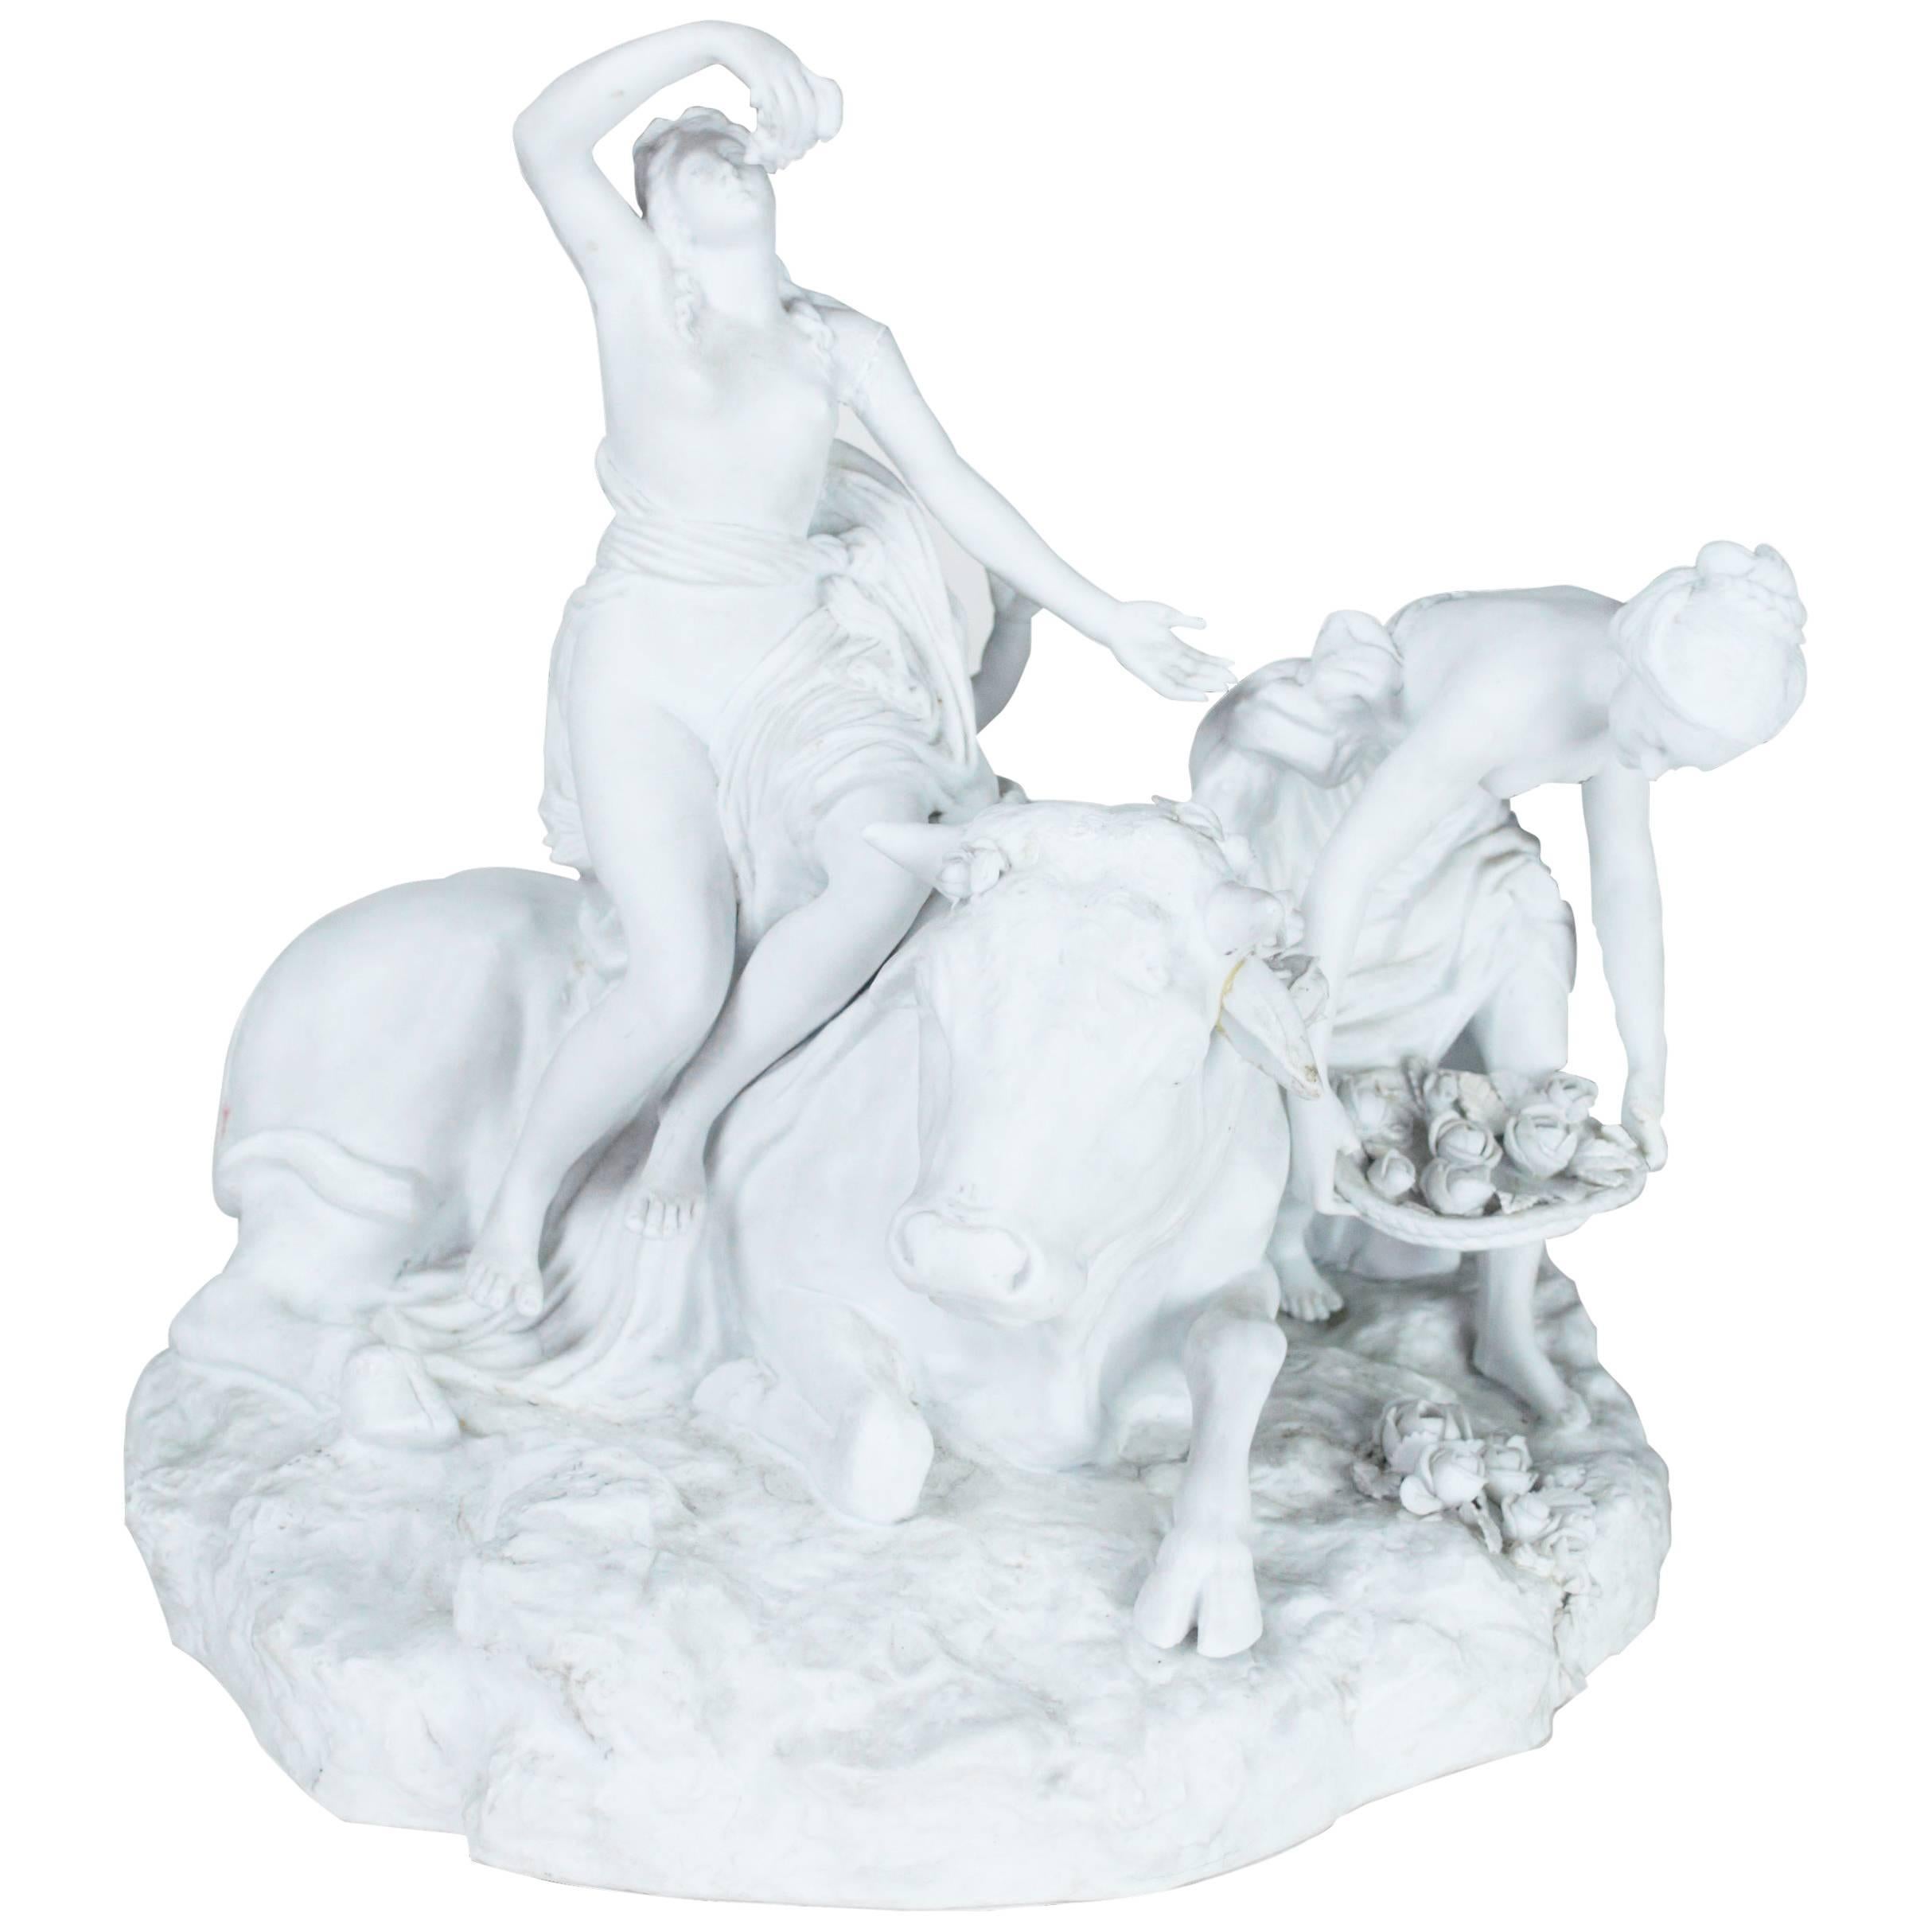 Large Parianware Group "Abduction of Europa by Zeus as a Bull" For Sale